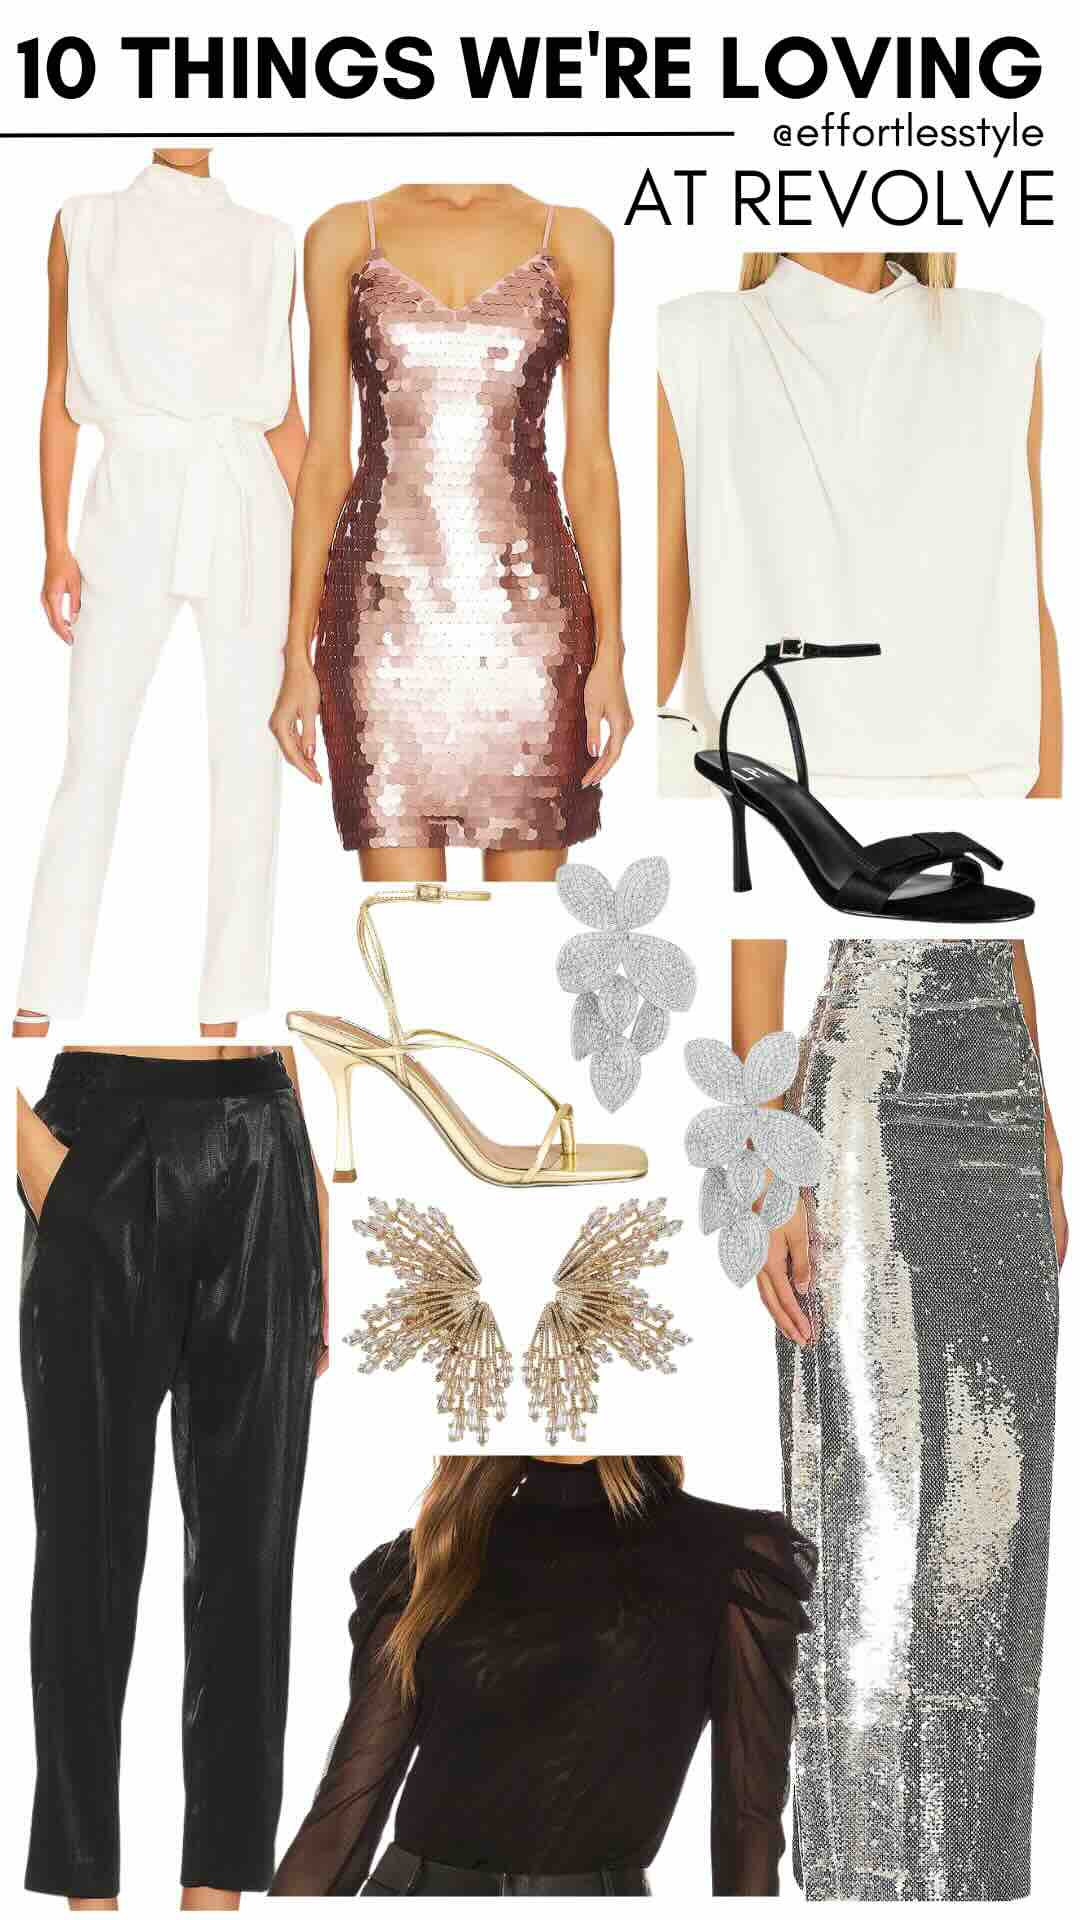 Ten Things We Are Loving For New Year's Eve At Revolve must have pieces for New Year's Eve must have dressy pieces for winter versatile dressy pieces for winter nights out must have dressy pieces for your winter closet nashville personal stylists share the best dressy winter pieces must have dressy accessories